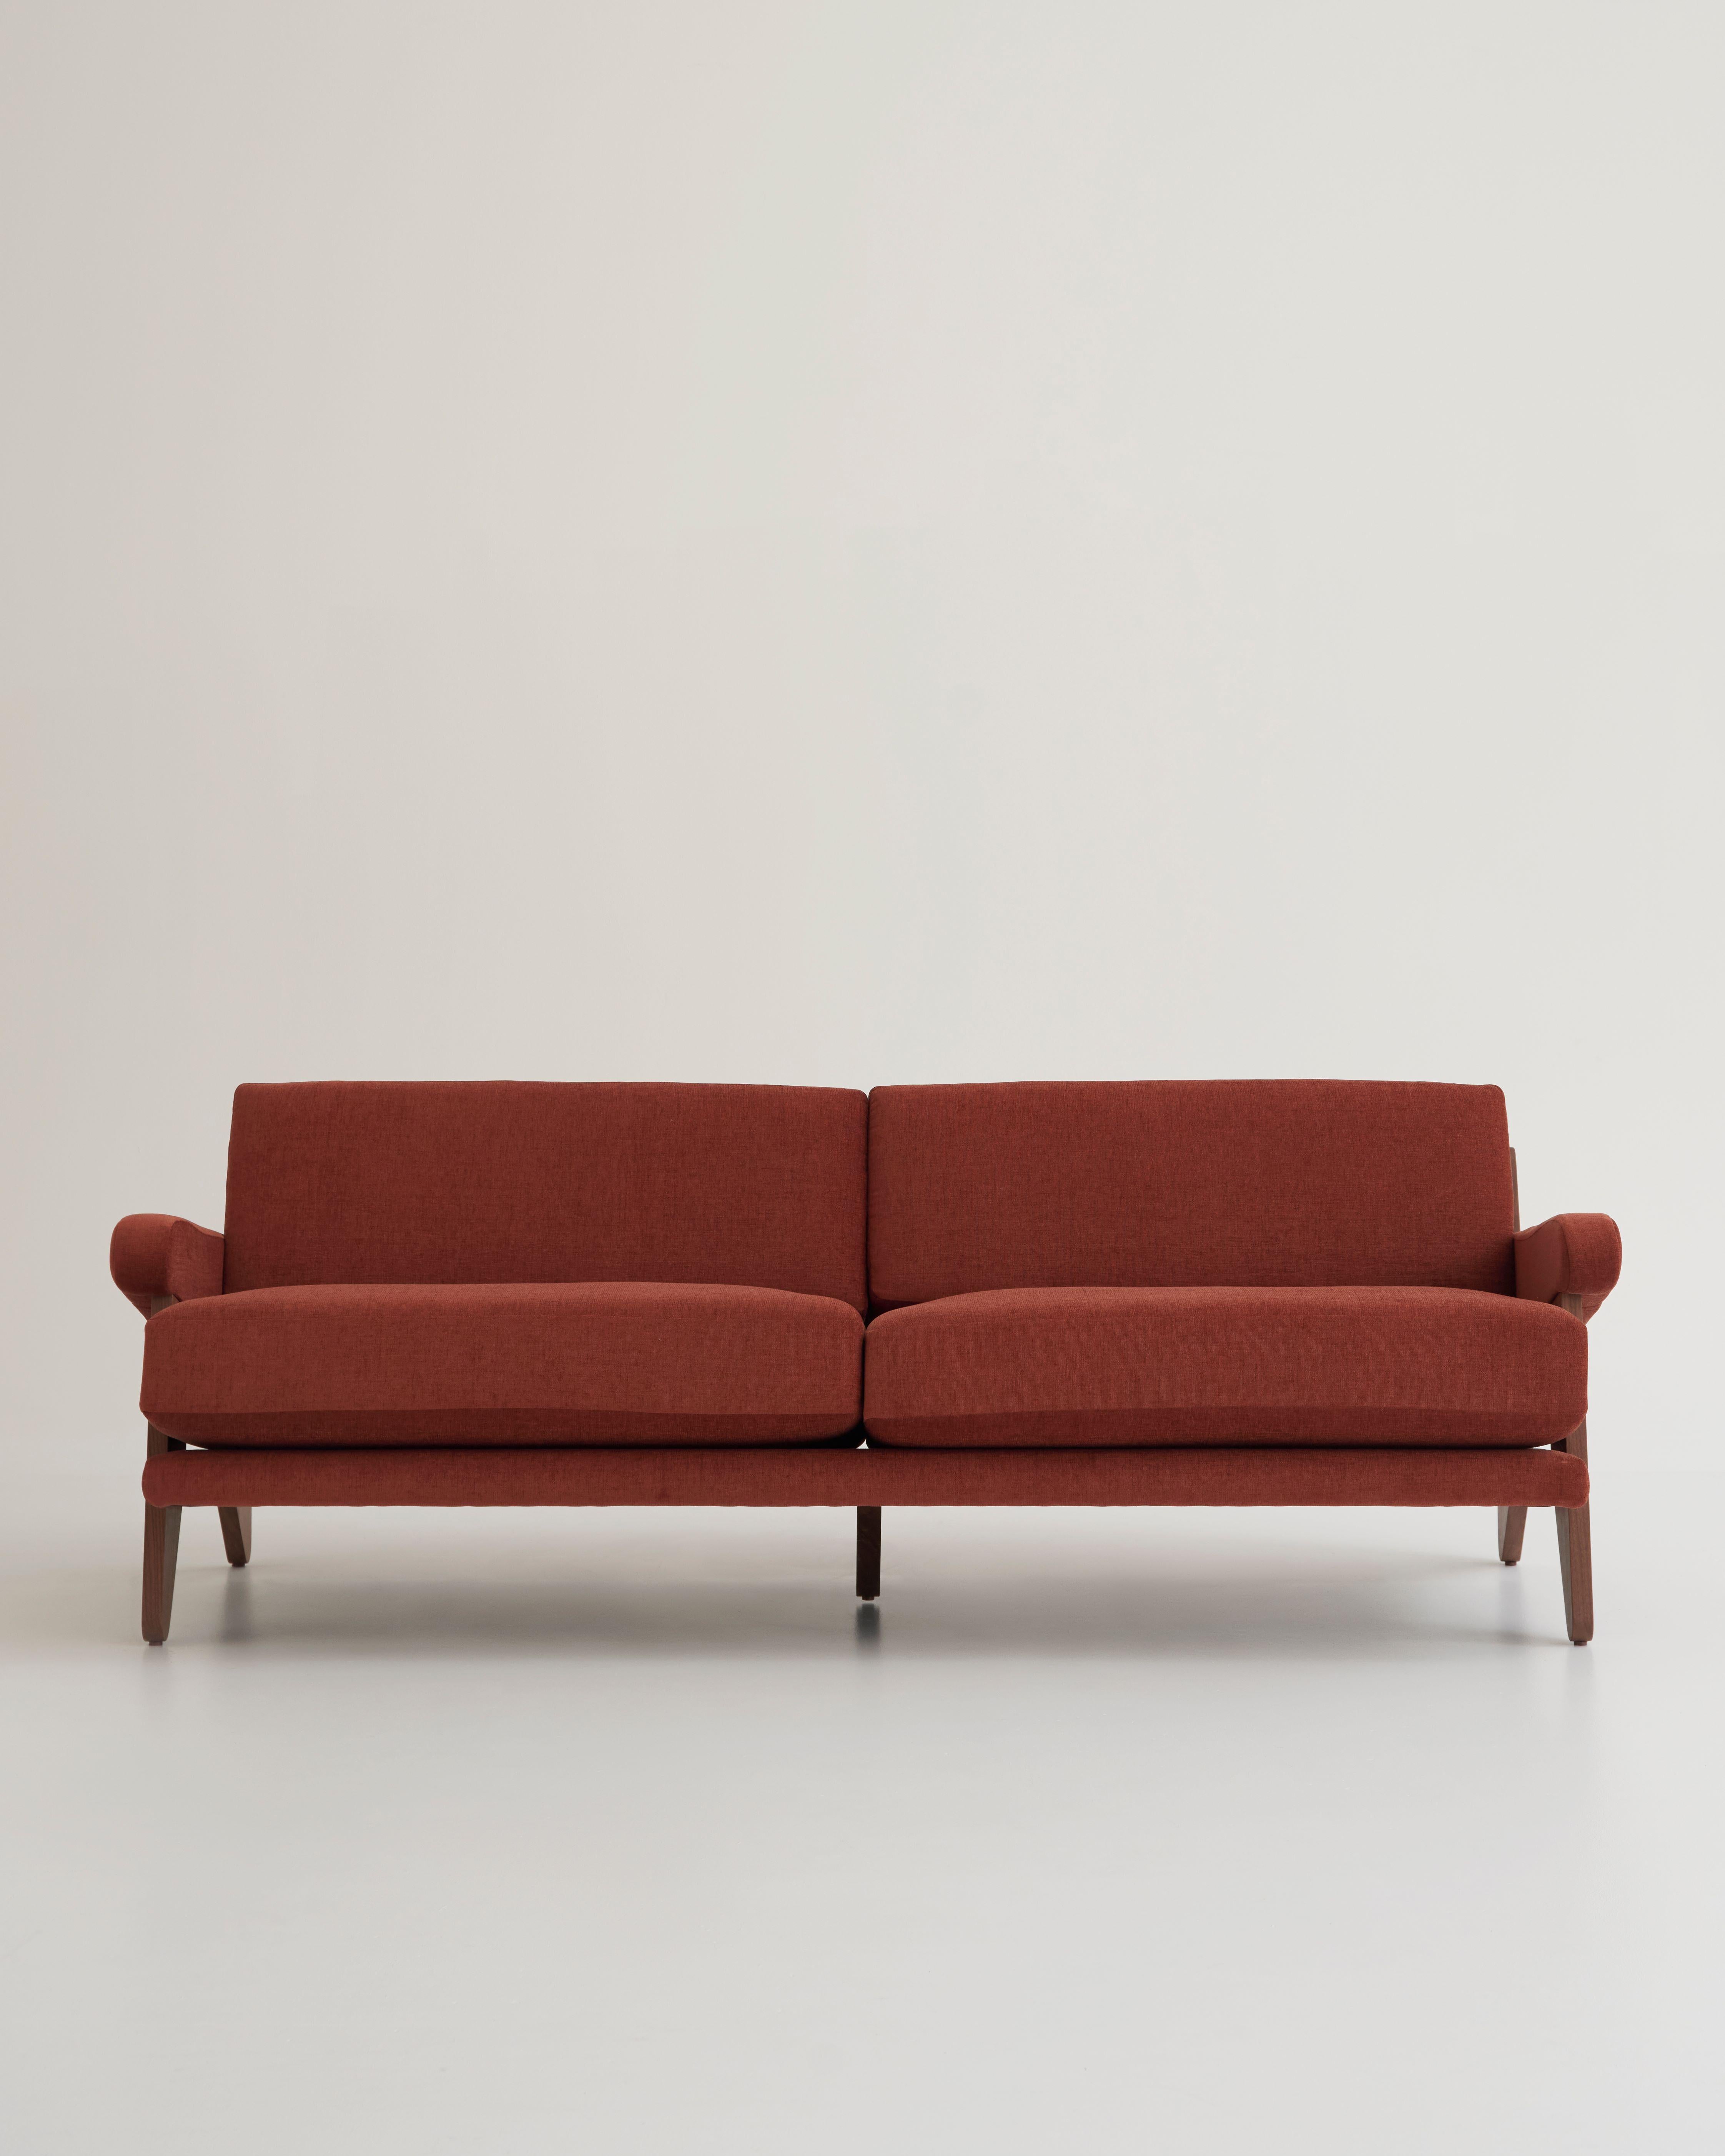 The Booham double sofa by Daniel Boddam Studio, is a design that marries modernist influences with Boddam’s signature Australian sensibility.

A testament to simplicity and elegance, the growing Booham Collection is inspired by a lifetime of